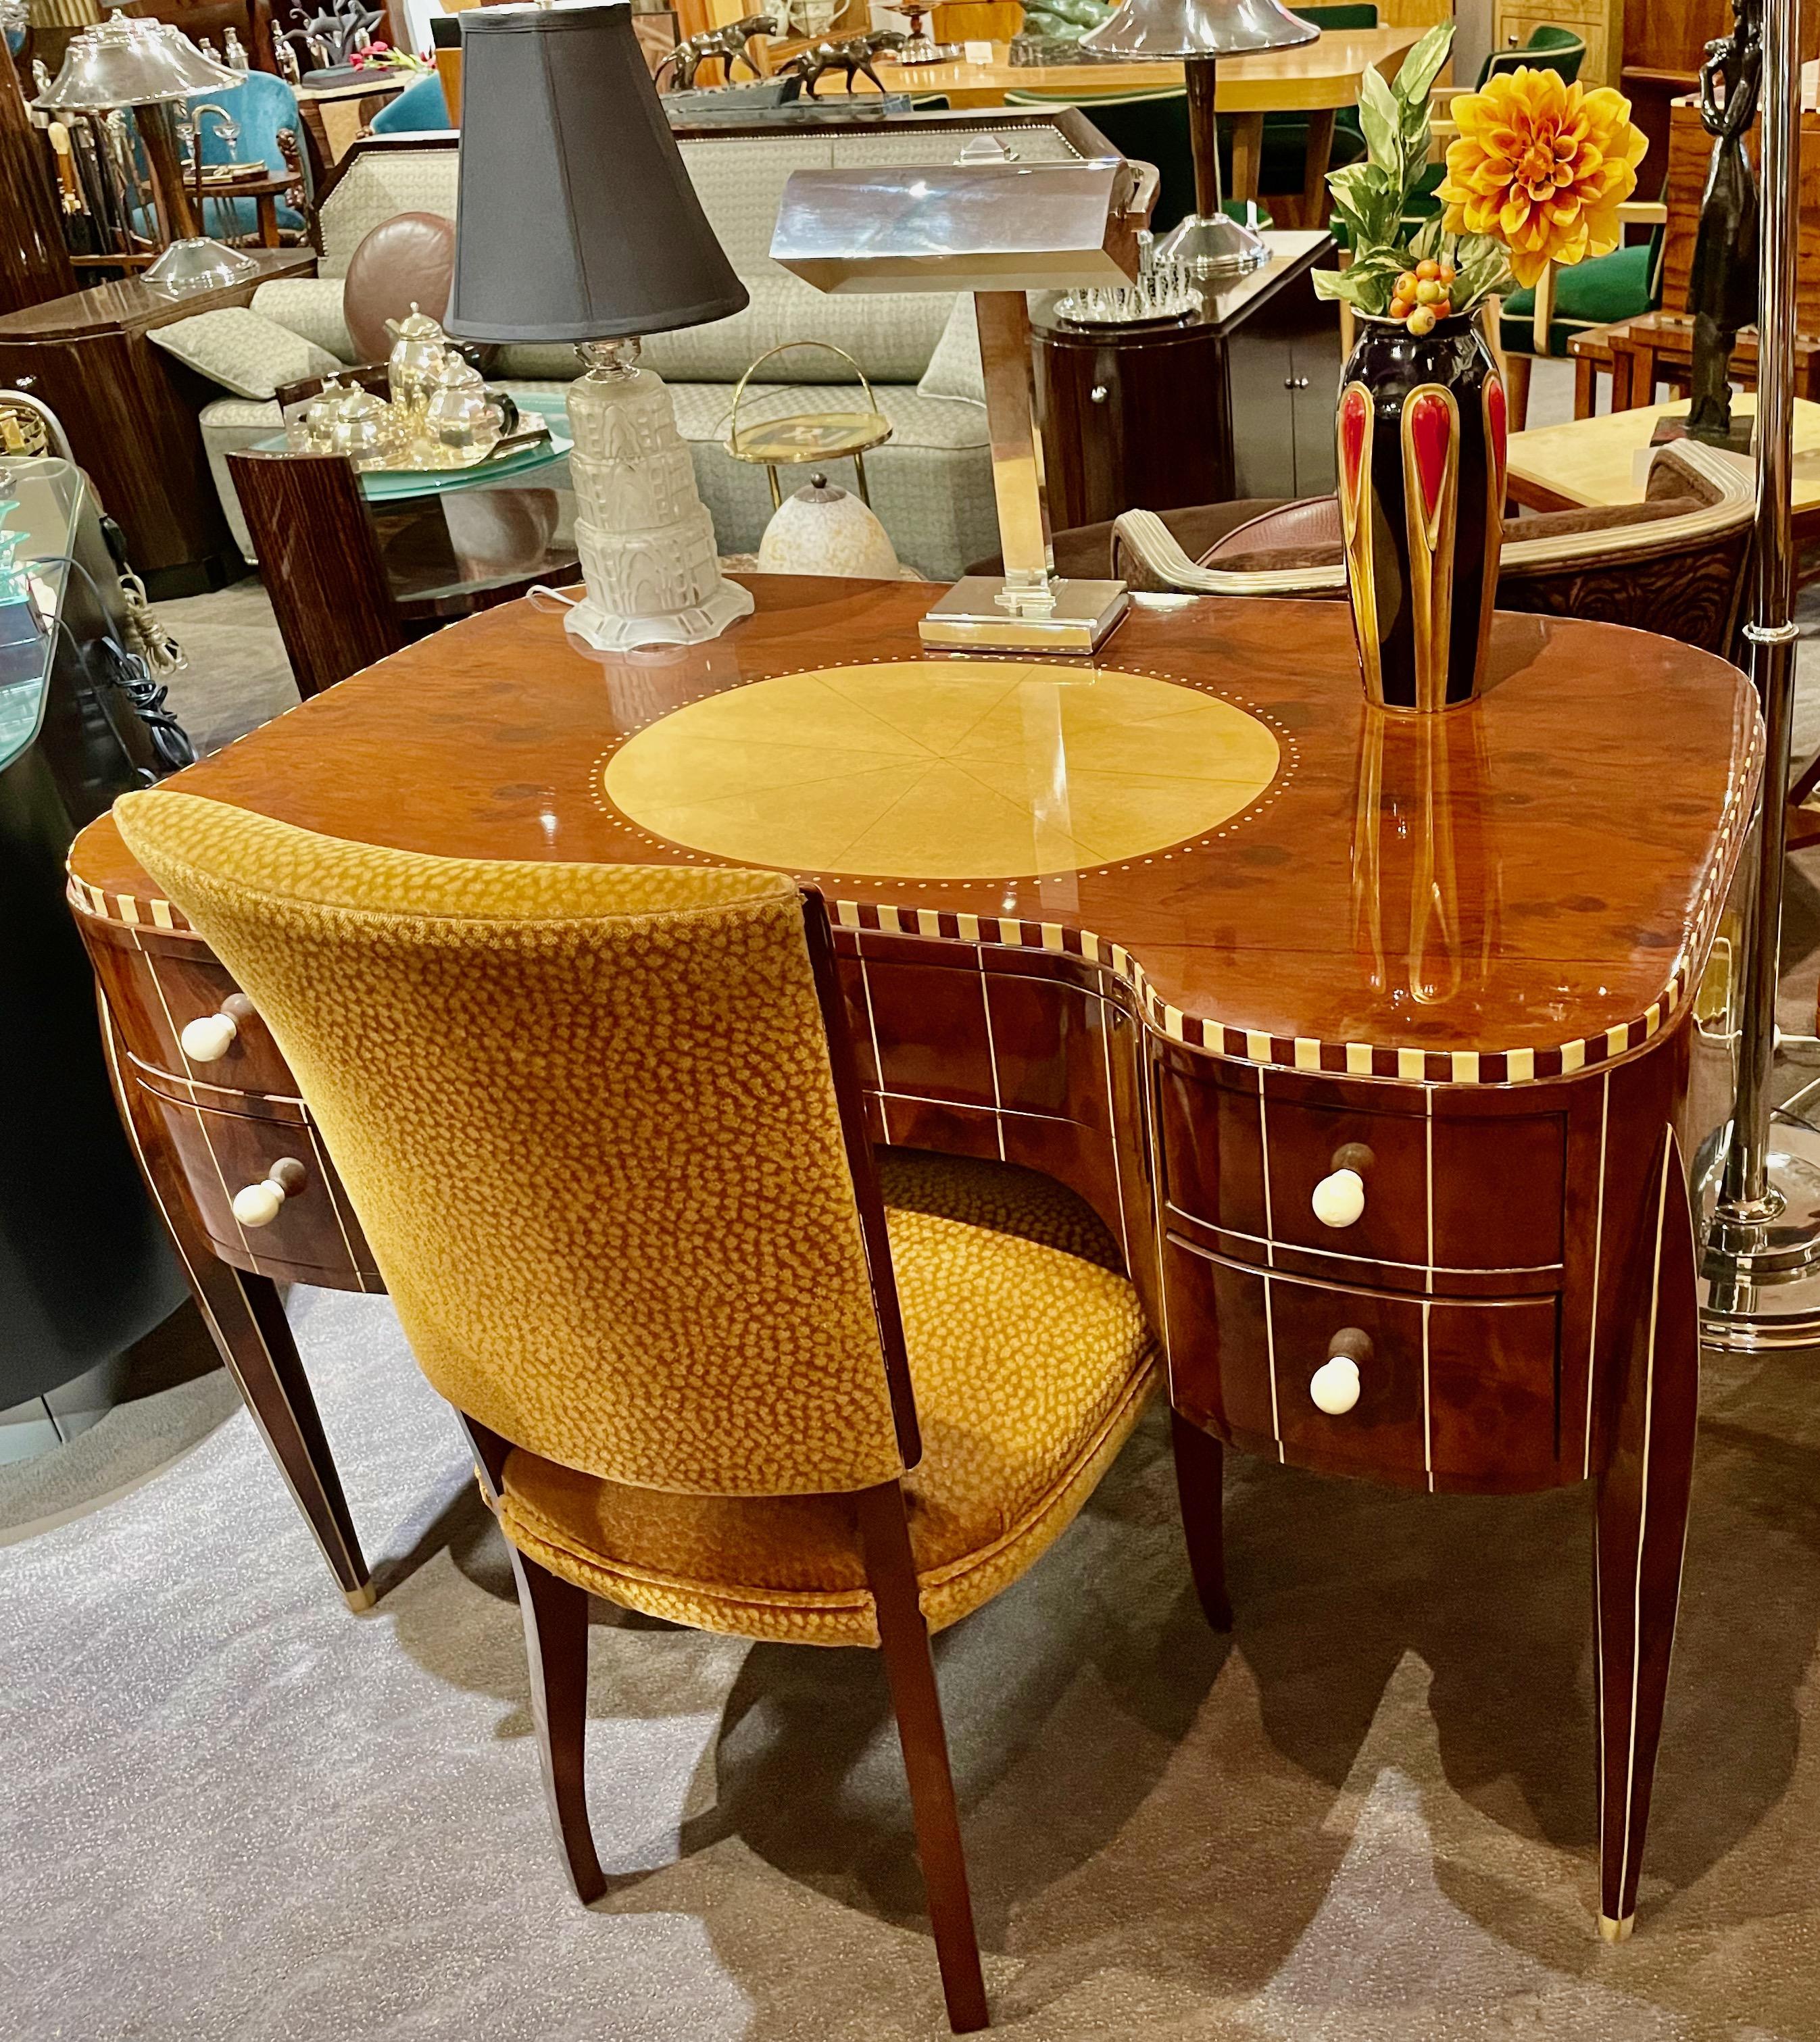 French Art Deco Desk In Style of Ruhlmann. Macassar wood was chosen and the “ivorite” plastic details were shaped and inlaid by master craftsmen working to create this timeless classic. A real signature of the Grand Art Deco period. The finish is